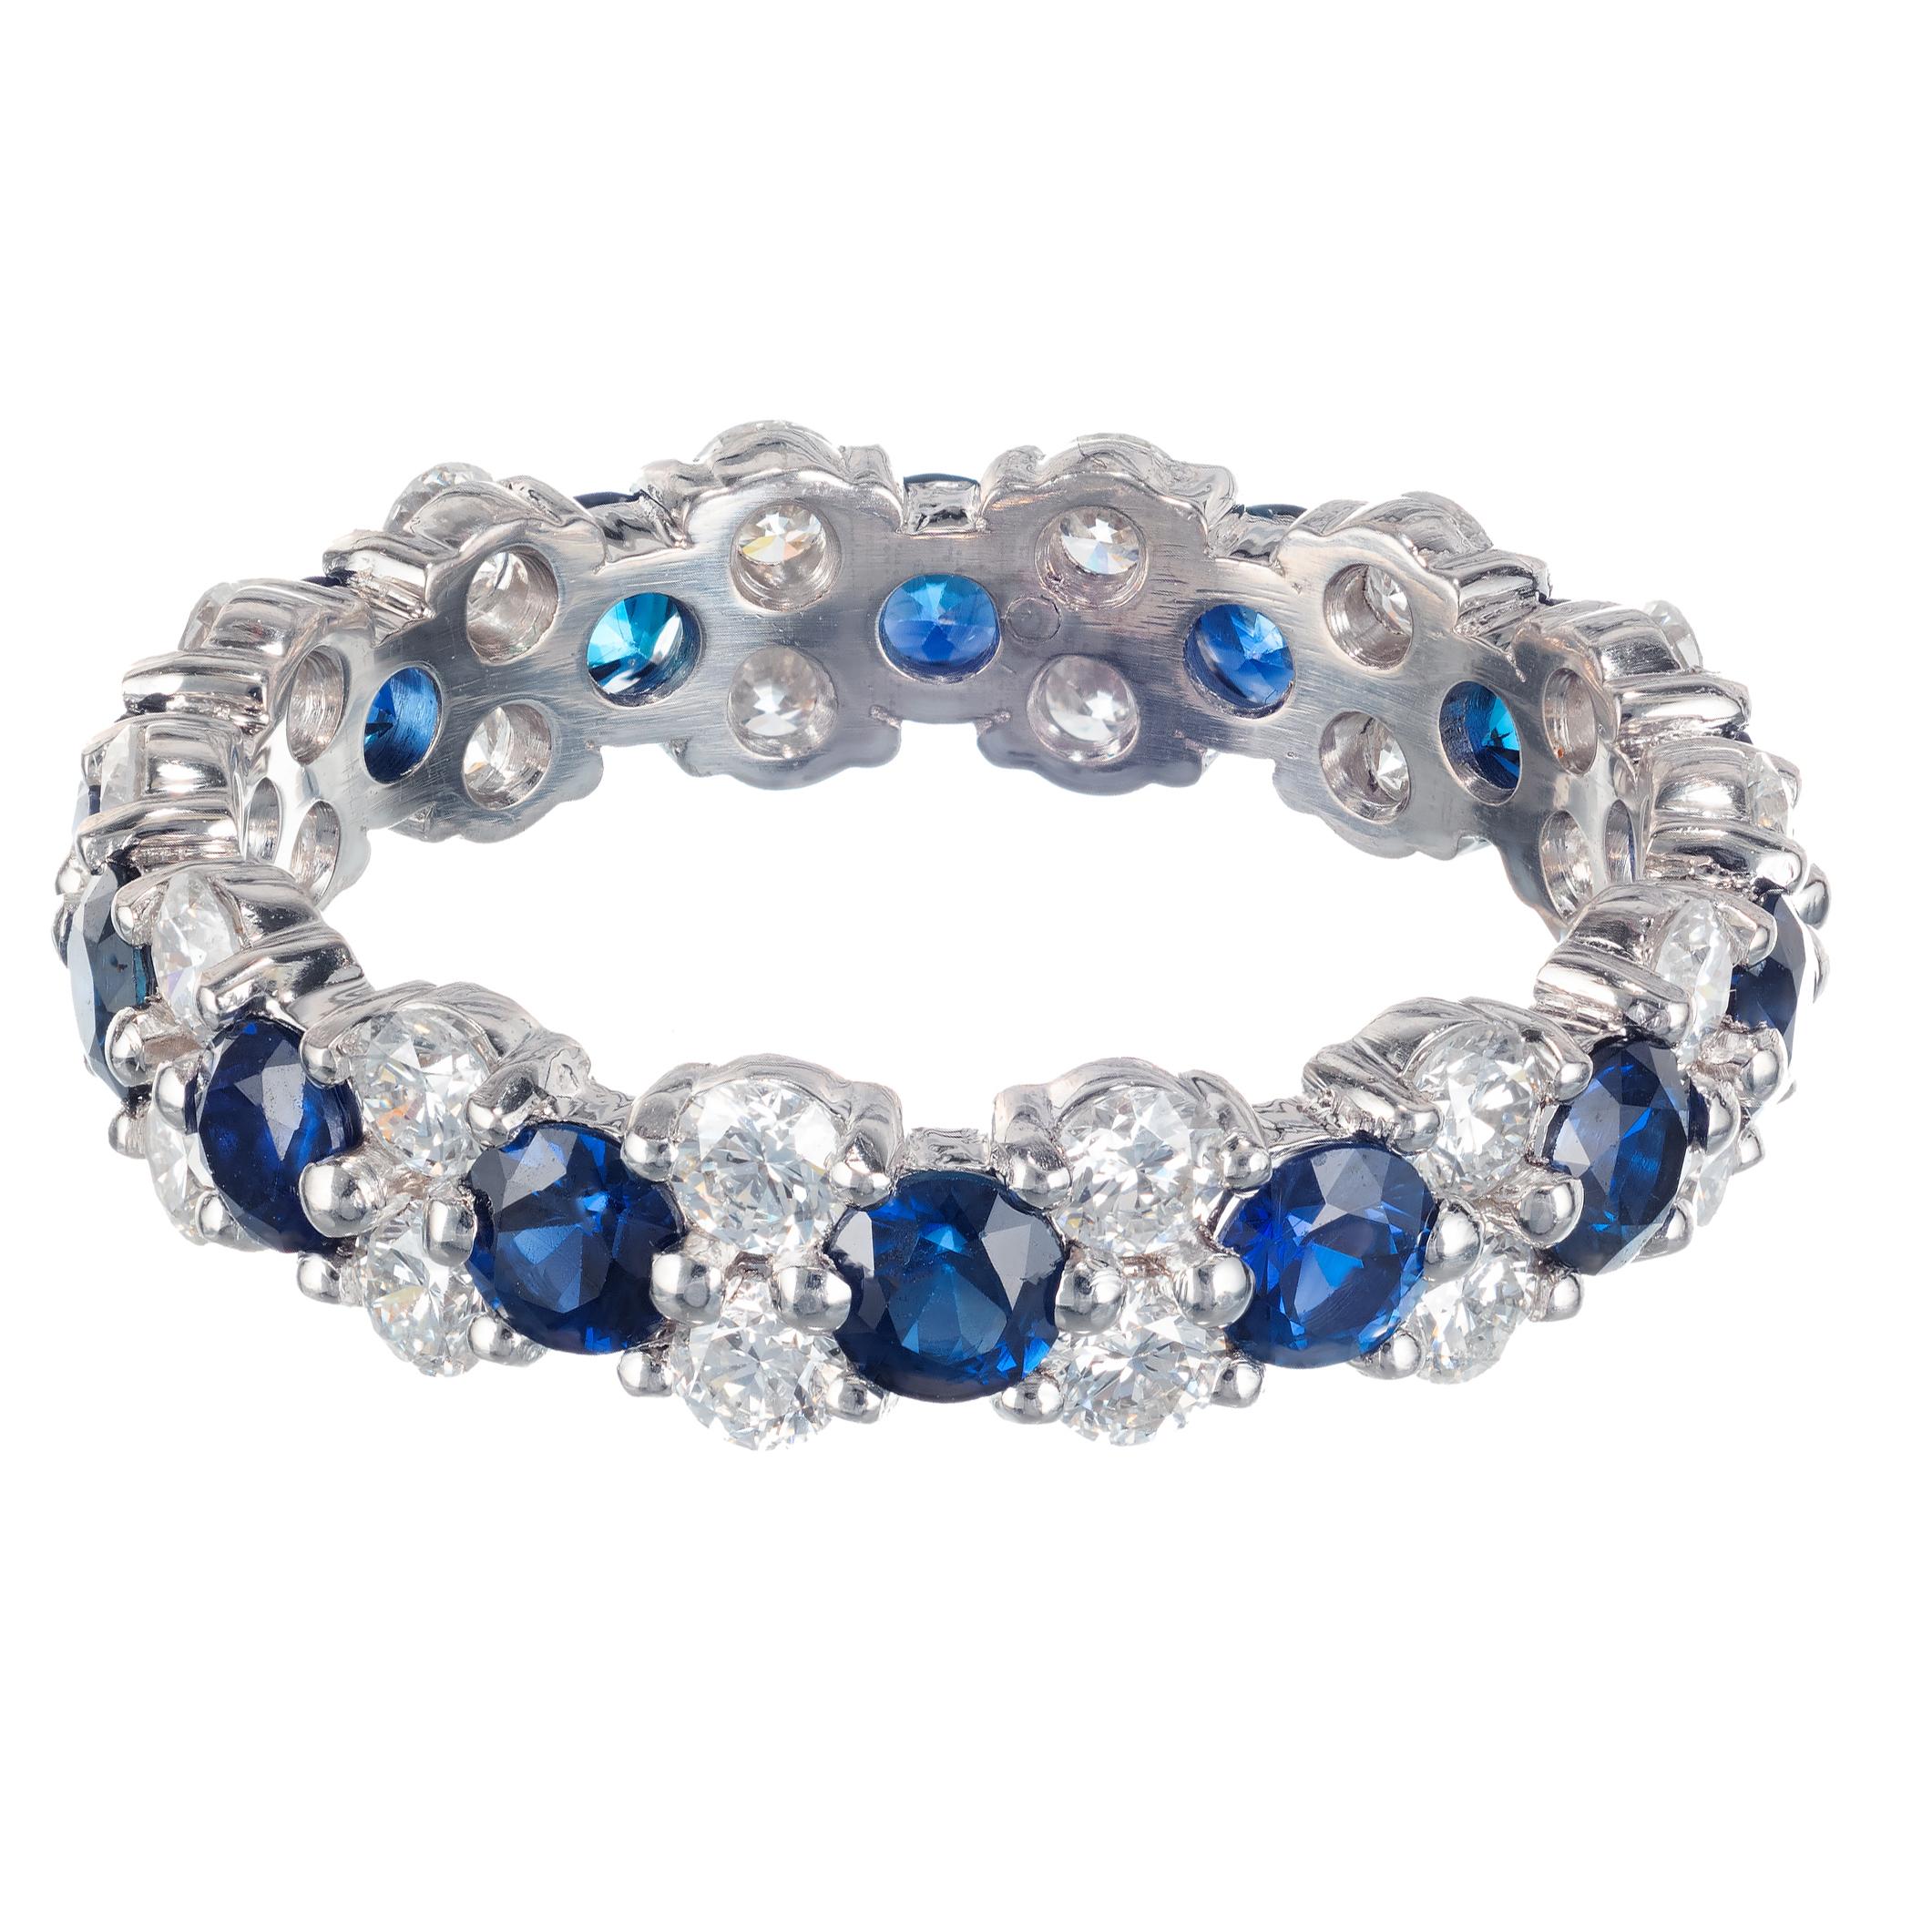 Sapphire and diamond eternity wedding band. 14 round sapphires in a platinum setting separated with 28 round, double stacked diamonds.  Designed in the Peter Suchy Workshop. 

14 round sapphires 1.50cts 2.8x2.8
28 round diamonds 1.10cts  E-F VS
Size